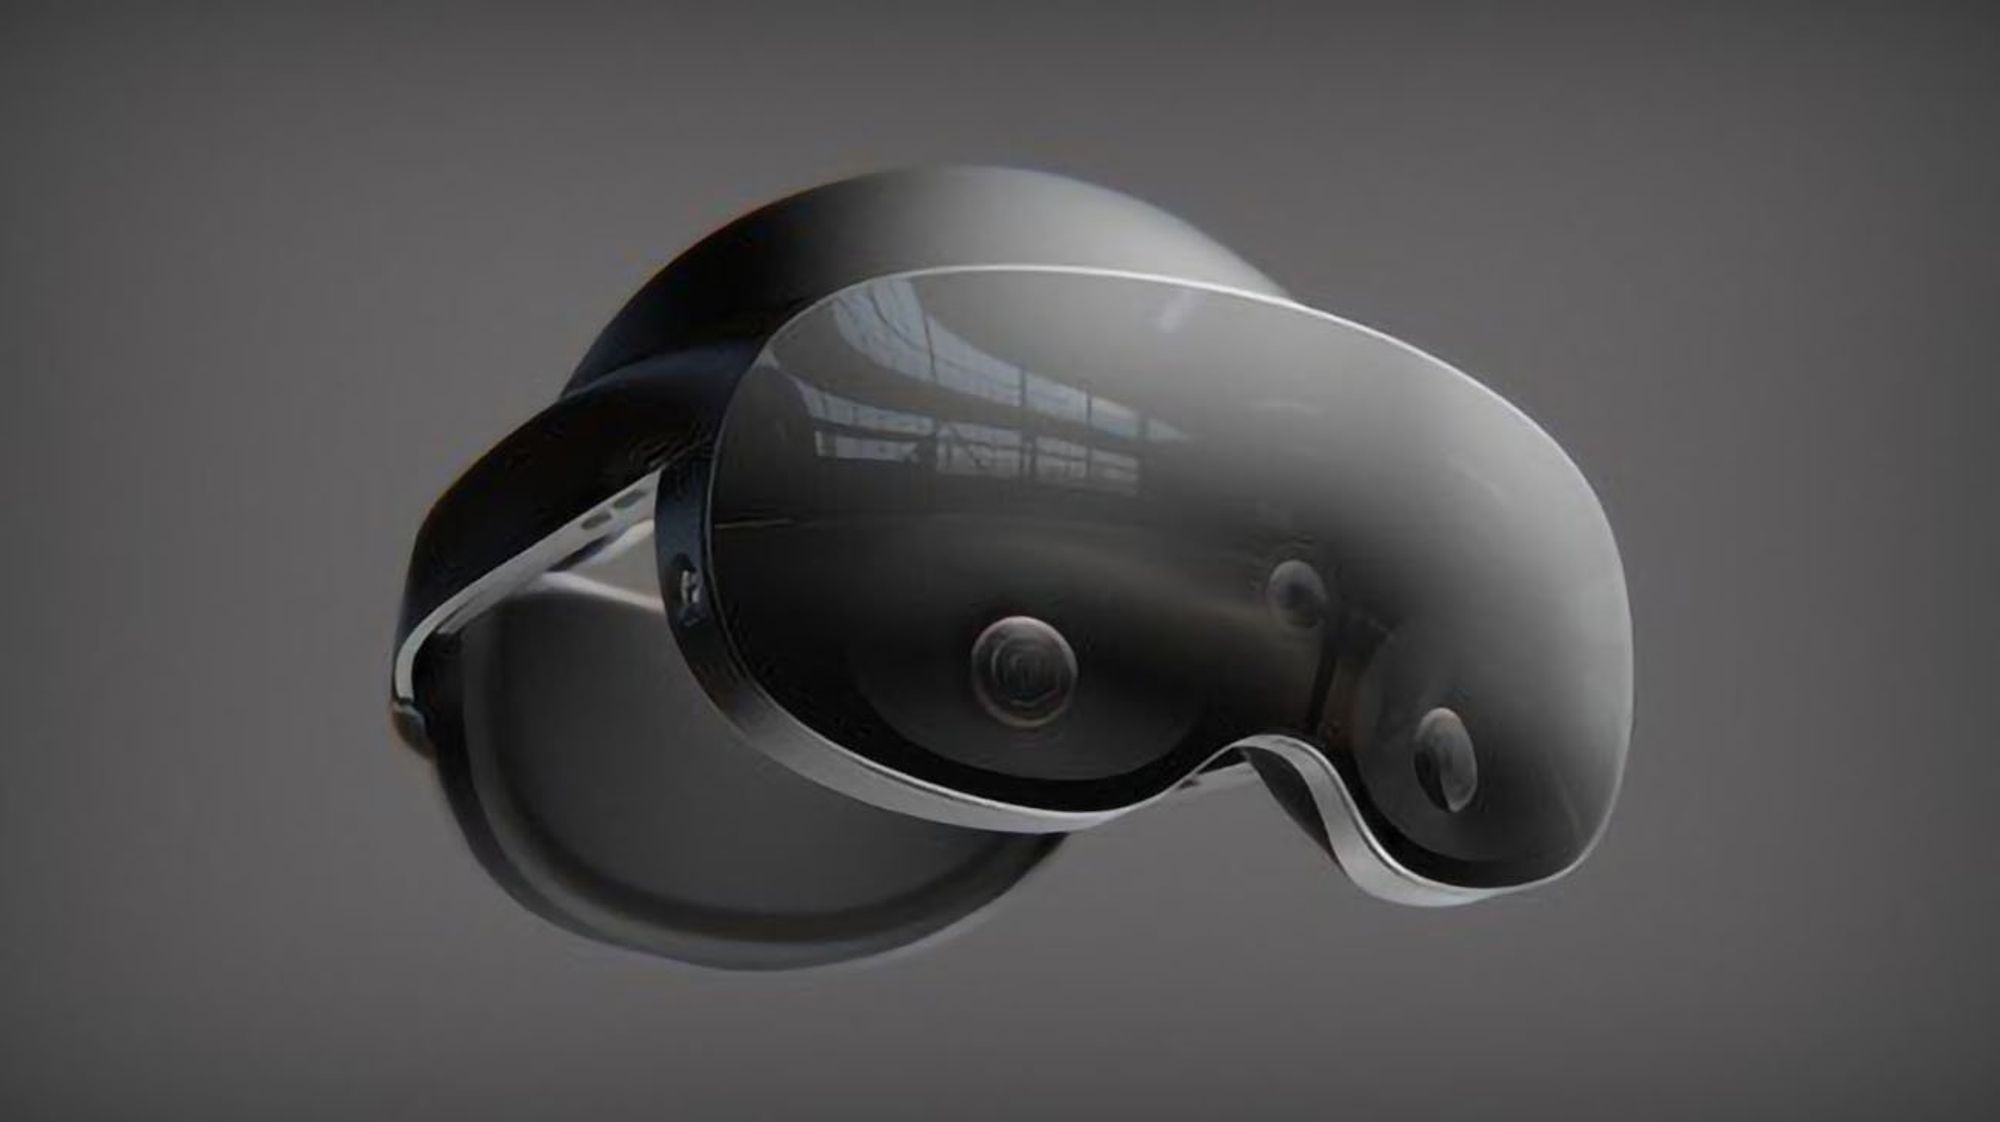 Here is the virtual reality headset that Meta is planning to launch the metaverse through